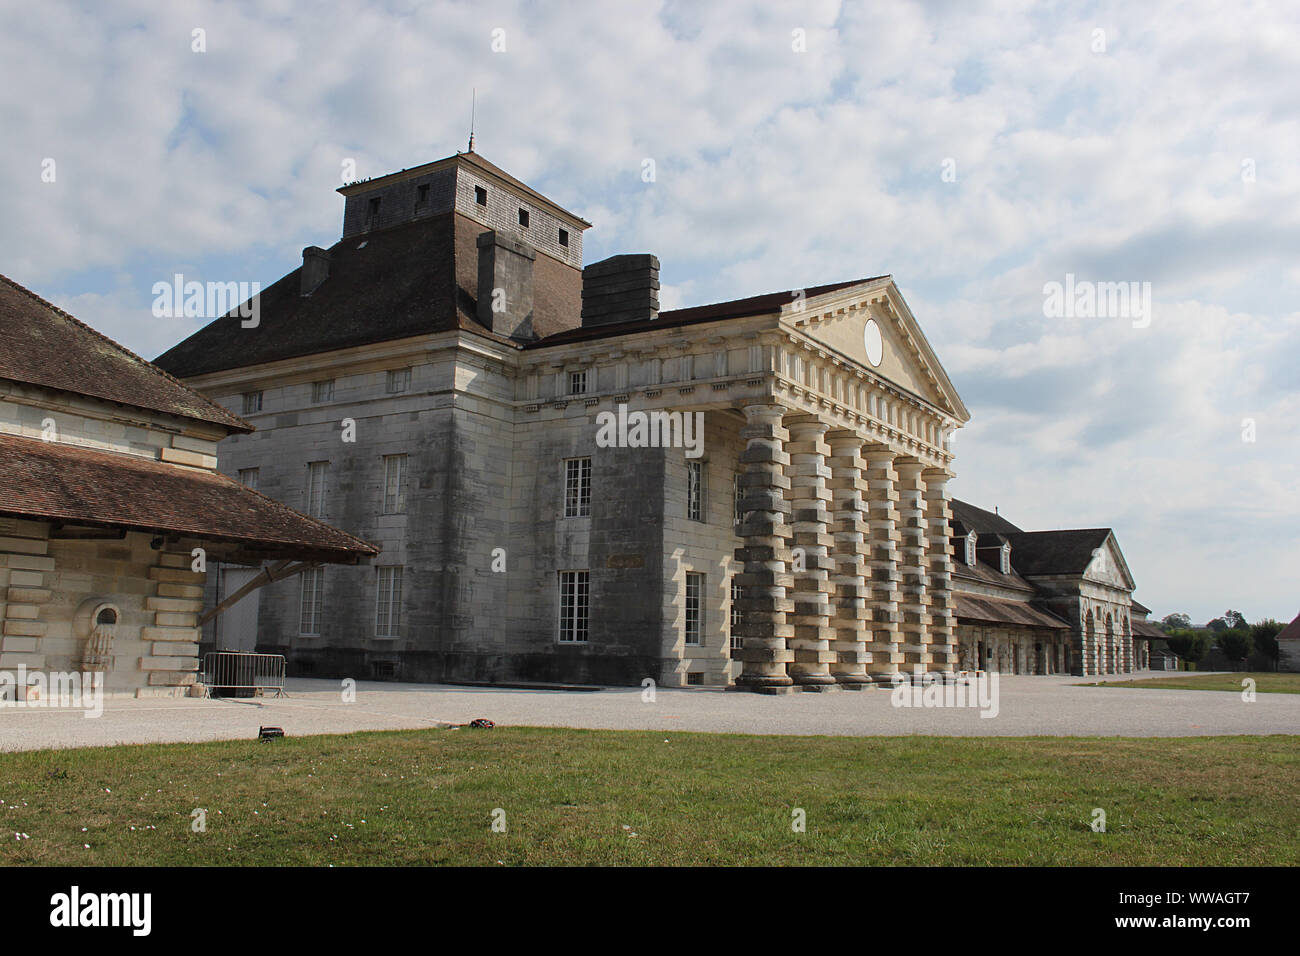 The Director's house at the Saline royale (the royal saltworks) at Arc-et-Senans, designed by the visionary architect Claude Nicolas Ledoux in 1774 Stock Photo